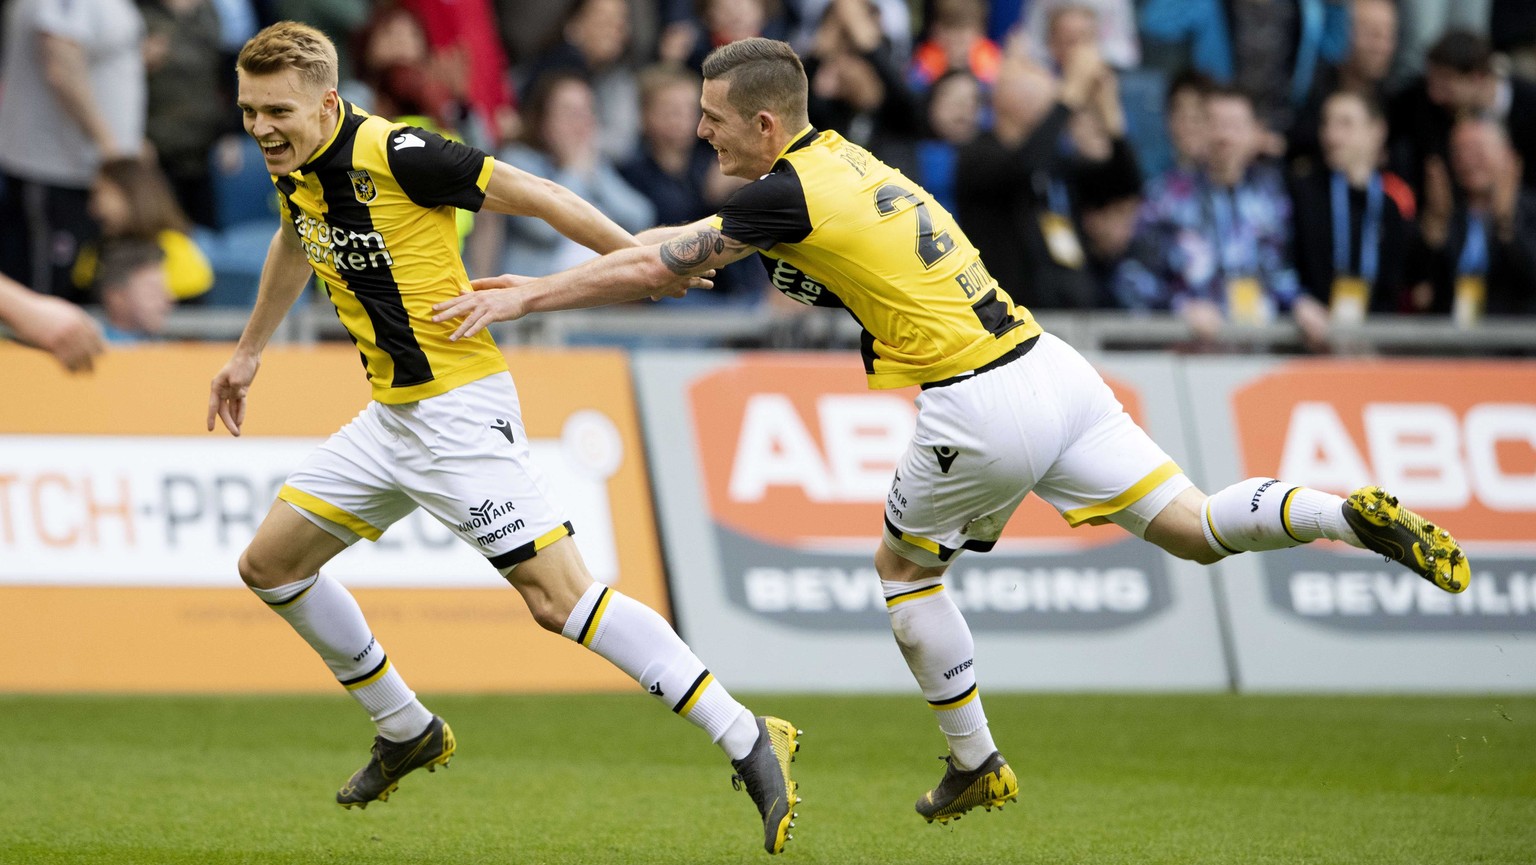 epa07490635 Martin Odegaard (L) of Vitesse celebrates with teammate Thomas Buitink scoring during the Dutch Eredivisie soccer match between Vitesse and PSV Eindhoven in Arnhem, the Netherlands, 07 Apr ...